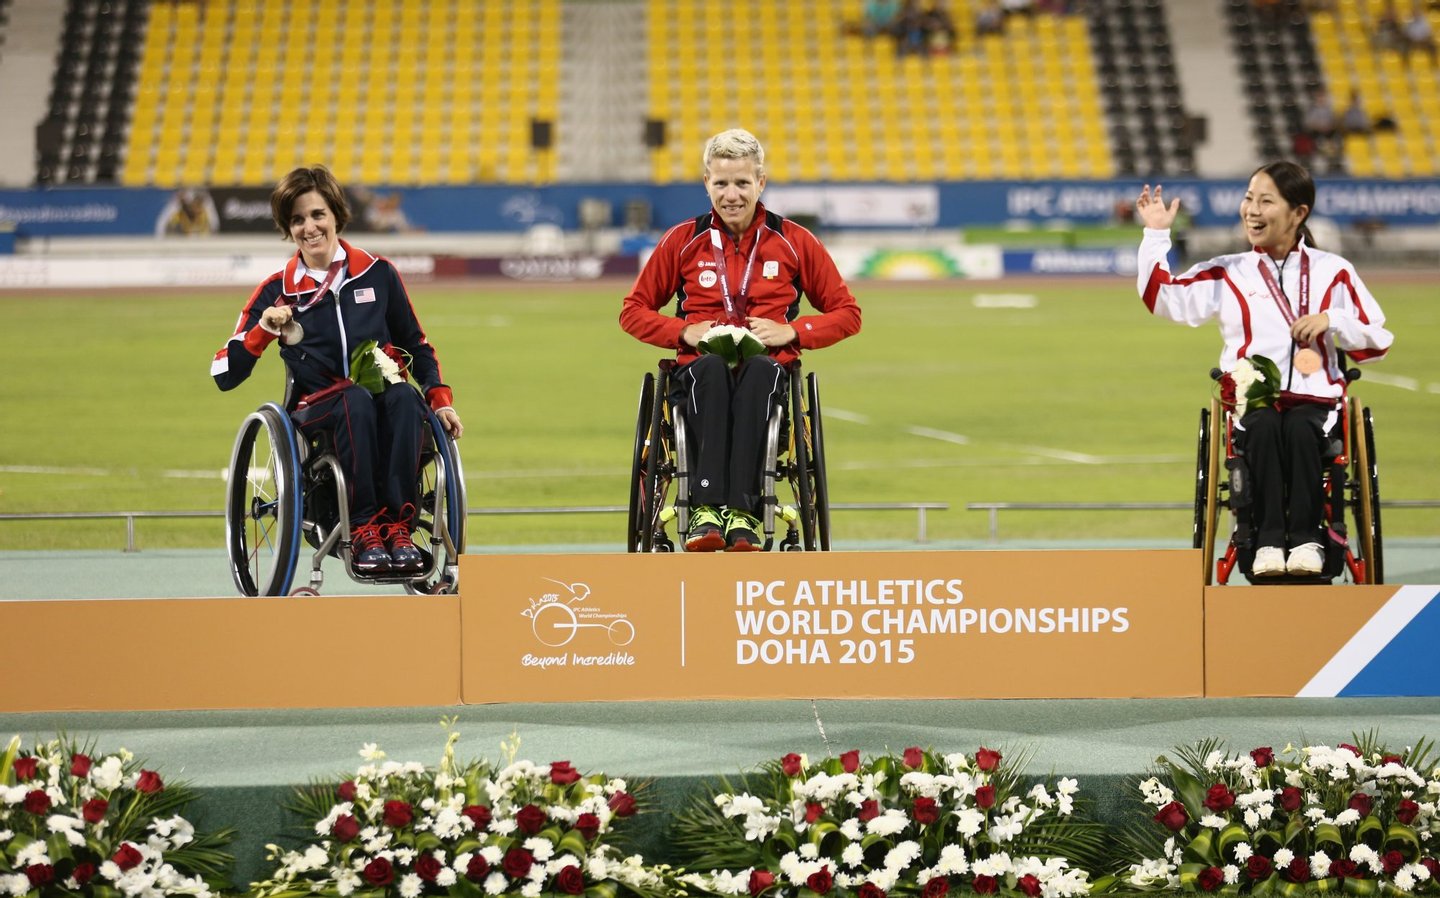 DOHA, QATAR - OCTOBER 26: Marieke Vervoort of Belgium poses with her gold medal, Kerry Morgan of USA silver and Yuka Kiyama of Japan bronze after the women's 100m T52 final during the Evening Session on Day Five of the IPC Athletics World Championships at Suhaim Bin Hamad Stadium on October 26, 2015 in Doha, Qatar. (Photo by Warren Little/Getty Images)